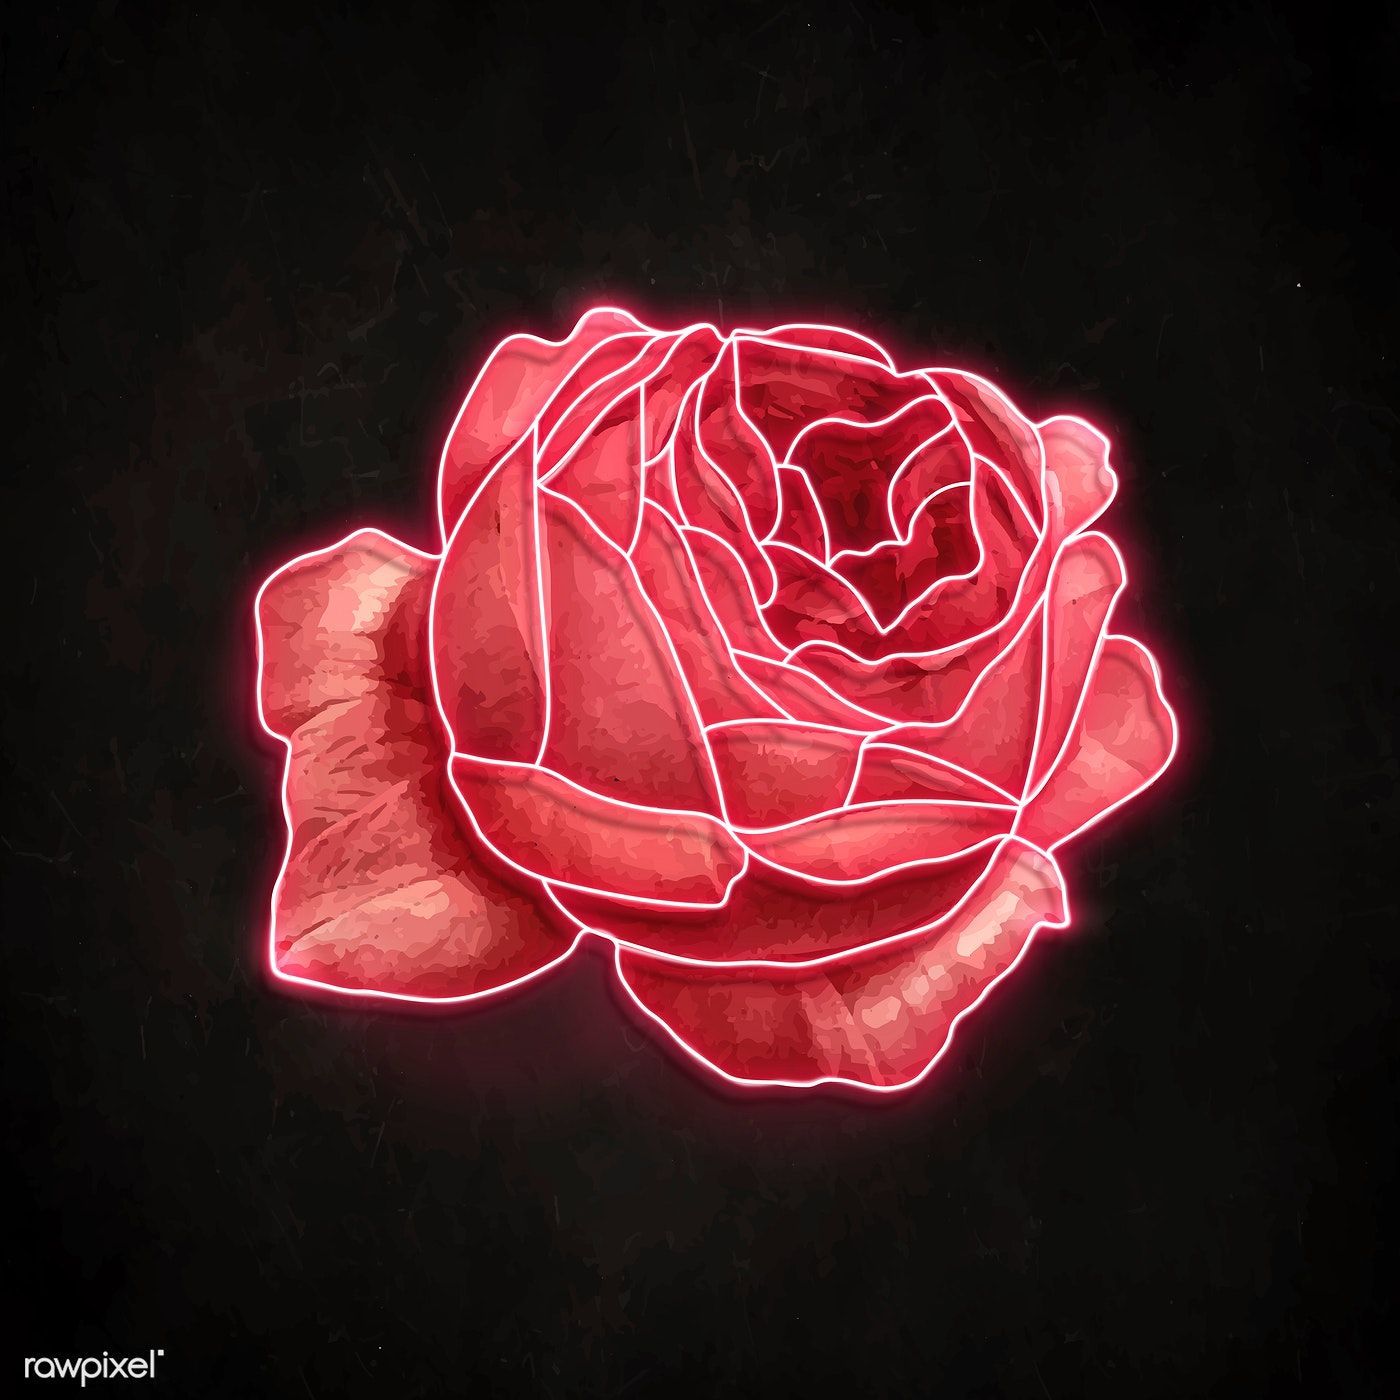 Download premium vector of Red neon rose on a black background vector. Red roses background, Rose drawing, Neon